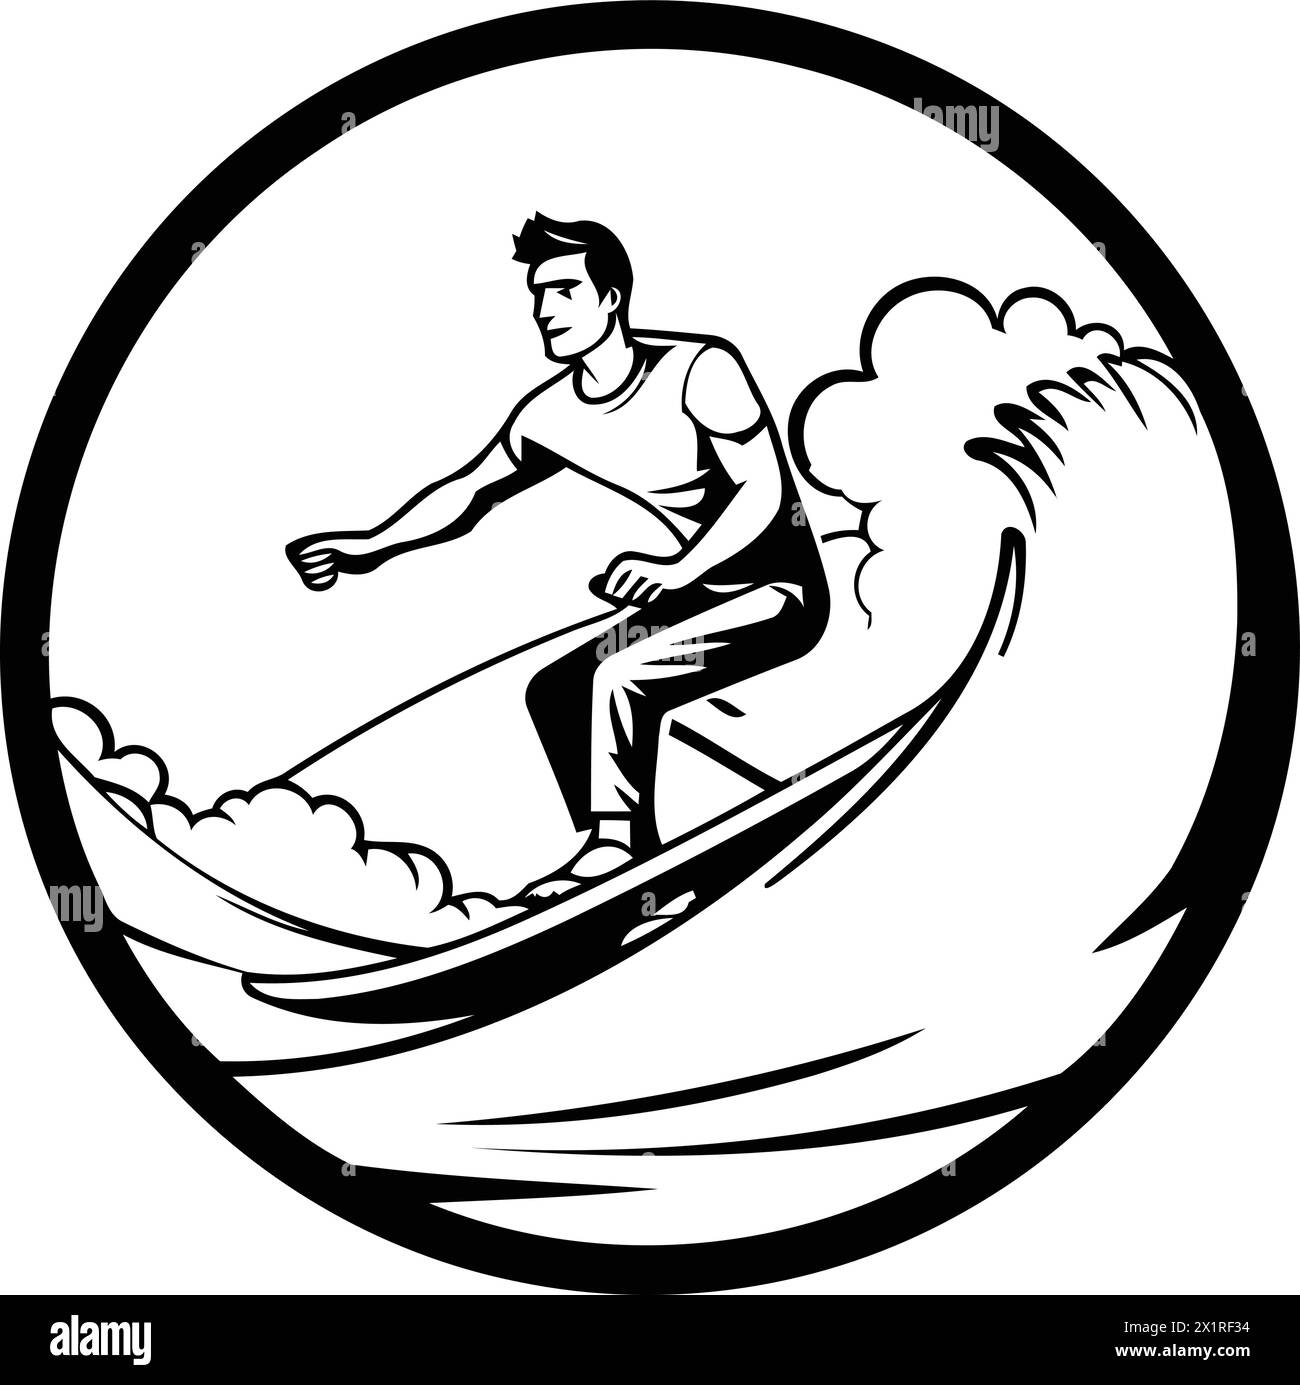 Vector illustration of a surfer riding a wave set inside circle on isolated background. Stock Vector